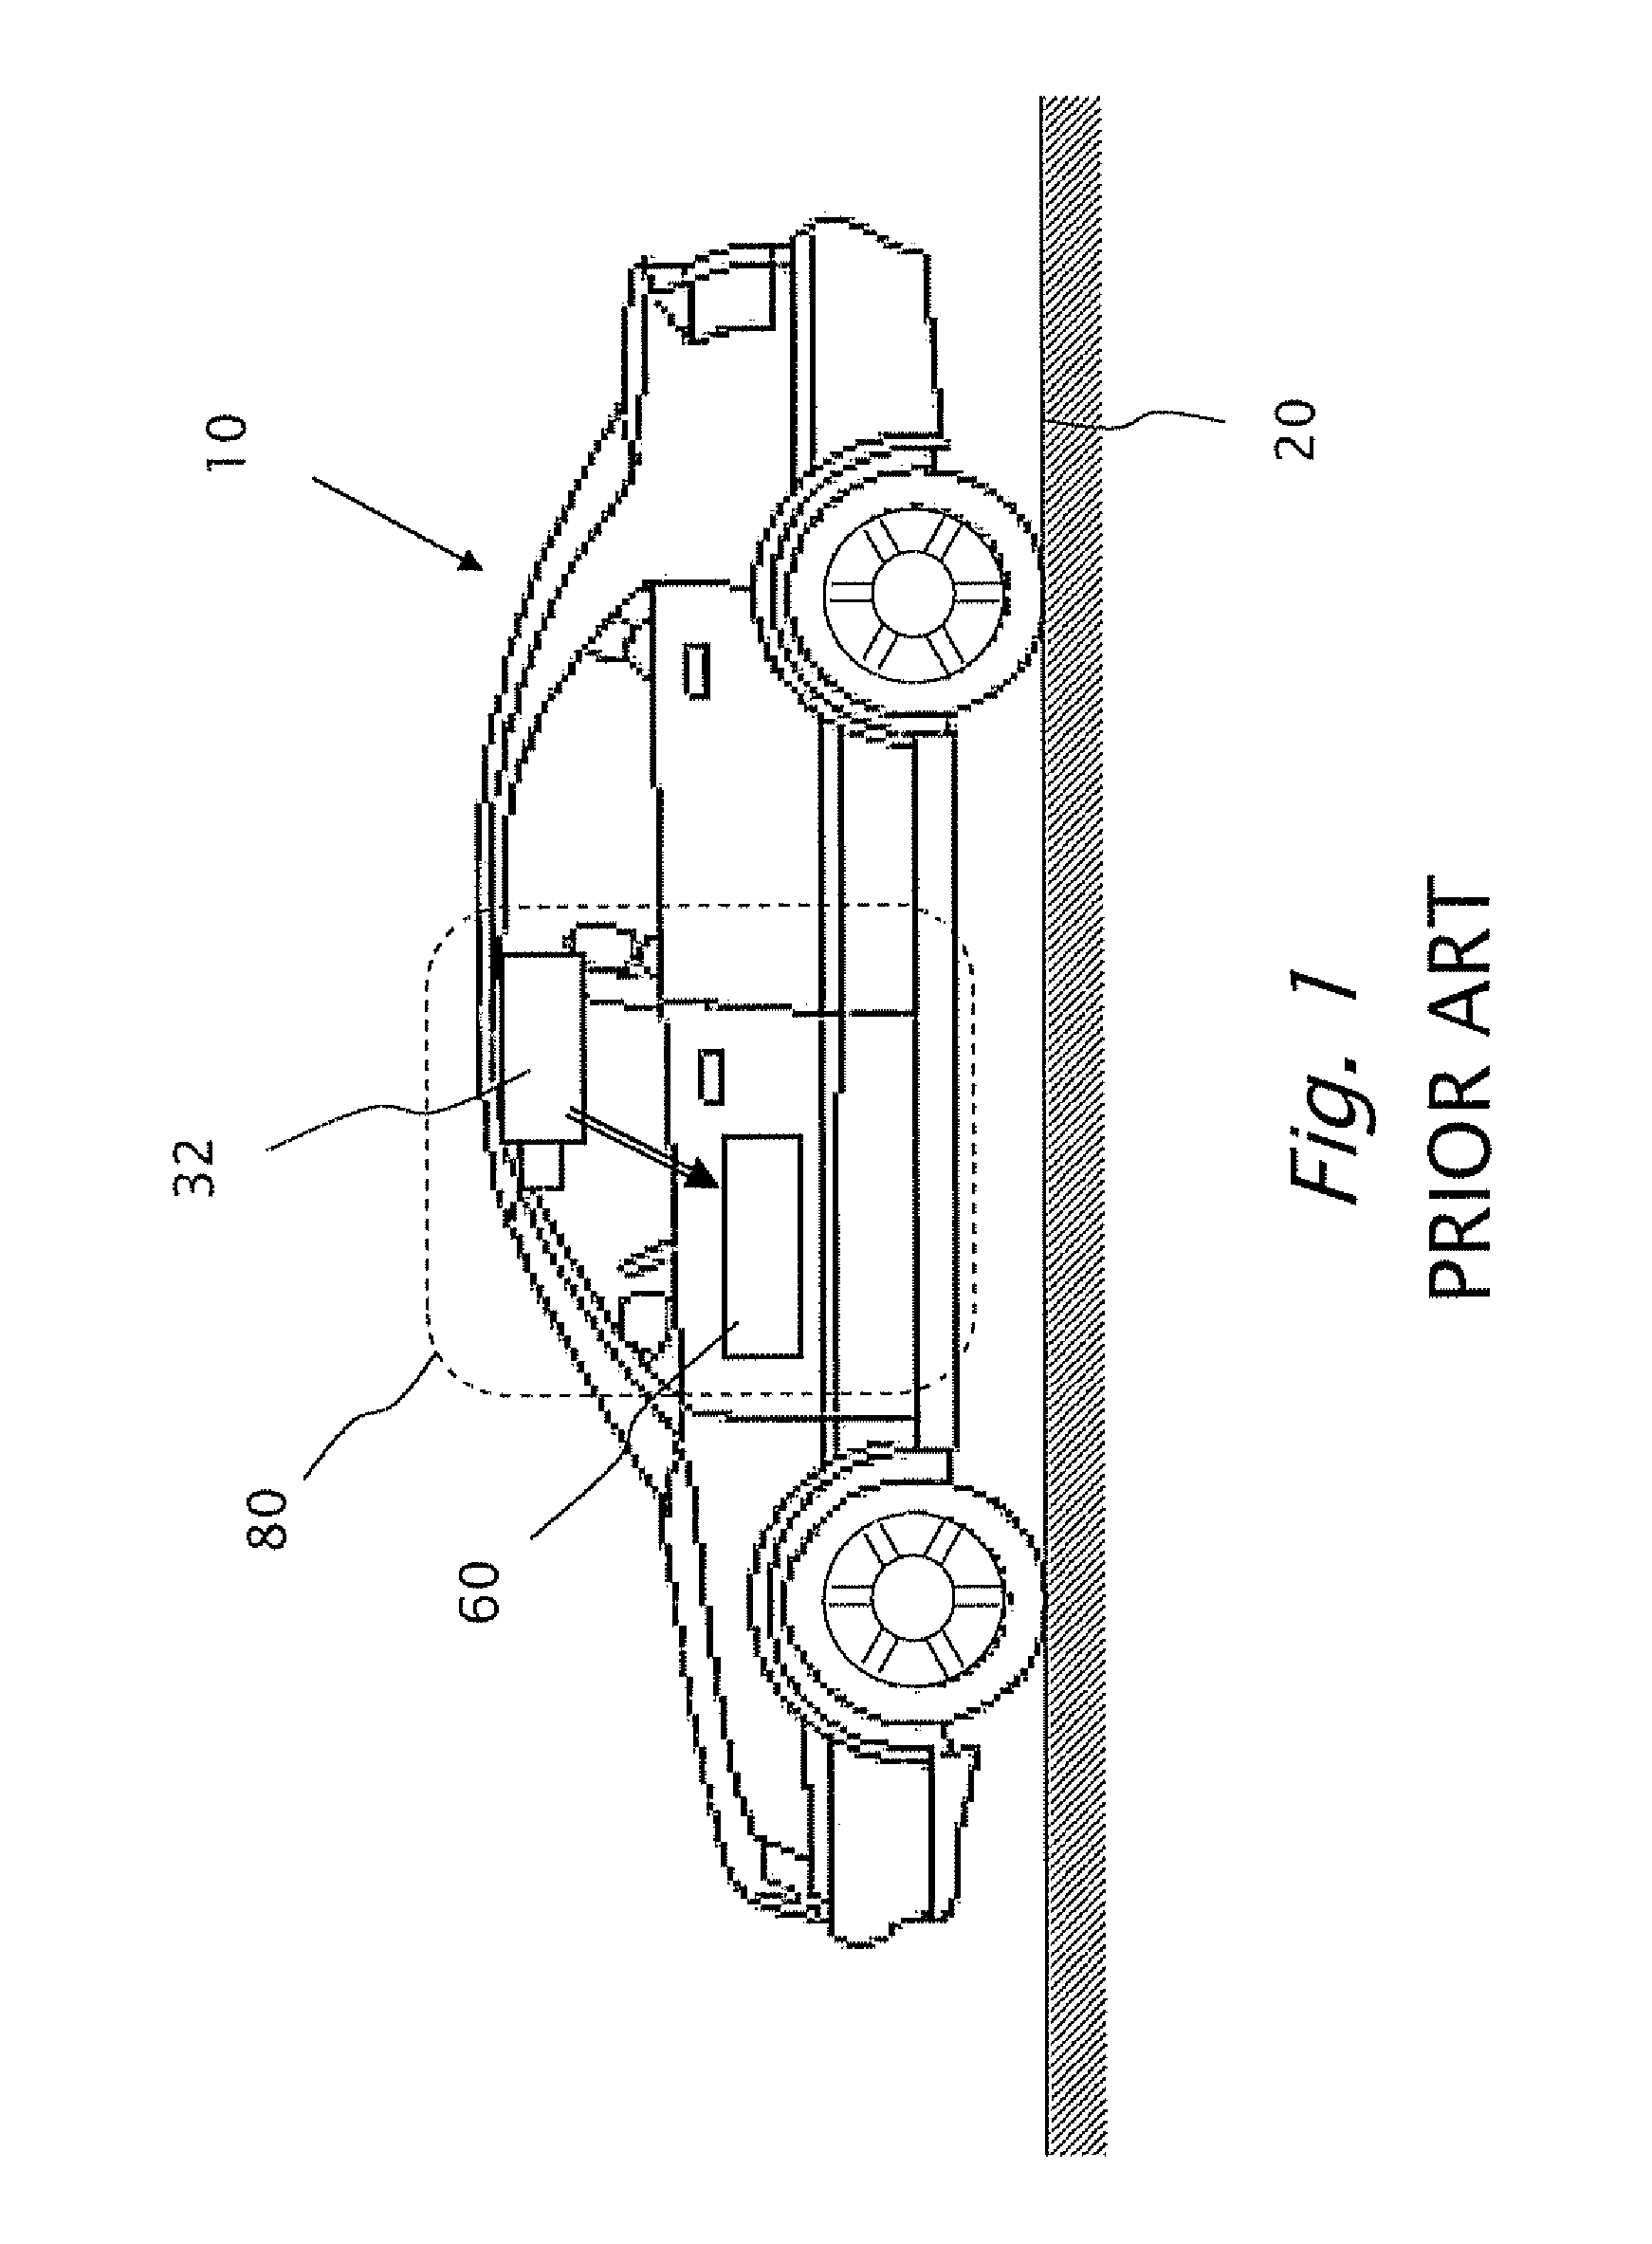 Systems and methods for detecting obstructions in a camera field of view